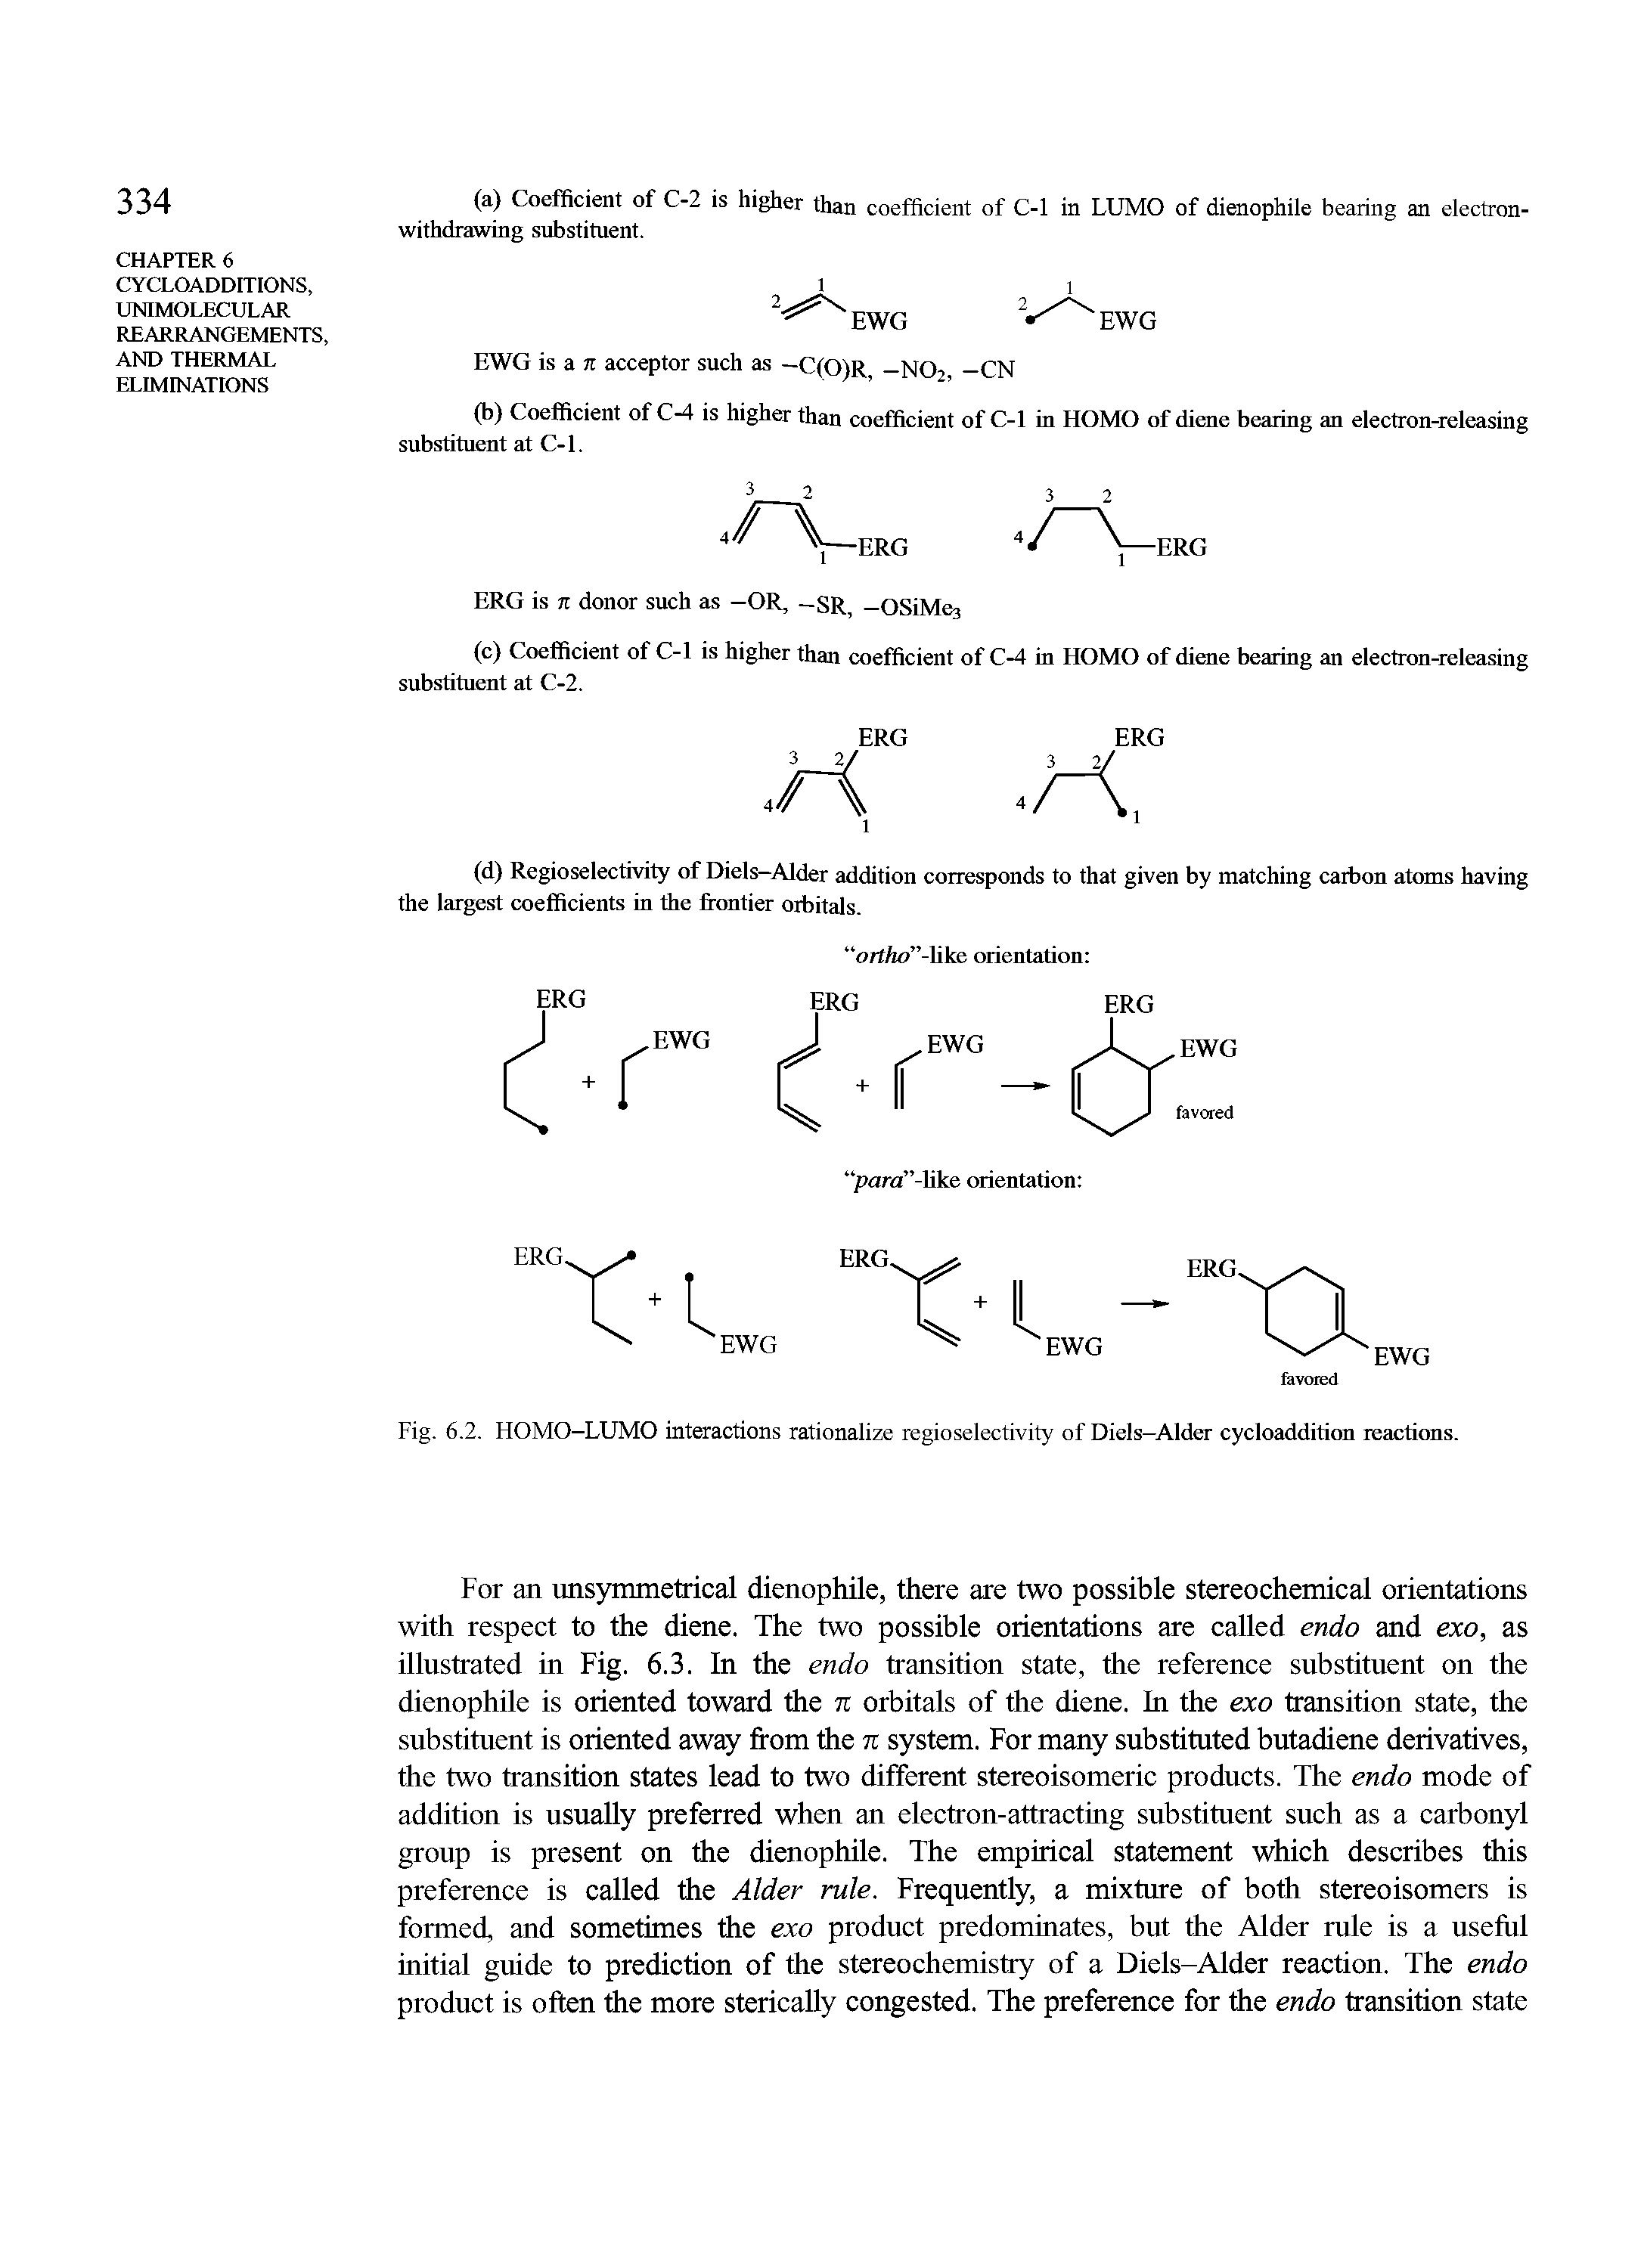 Fig. 6.2. HOMO-LUMO interactions rationalize regioselectivity of Diels-Alder cycloaddition reactions.